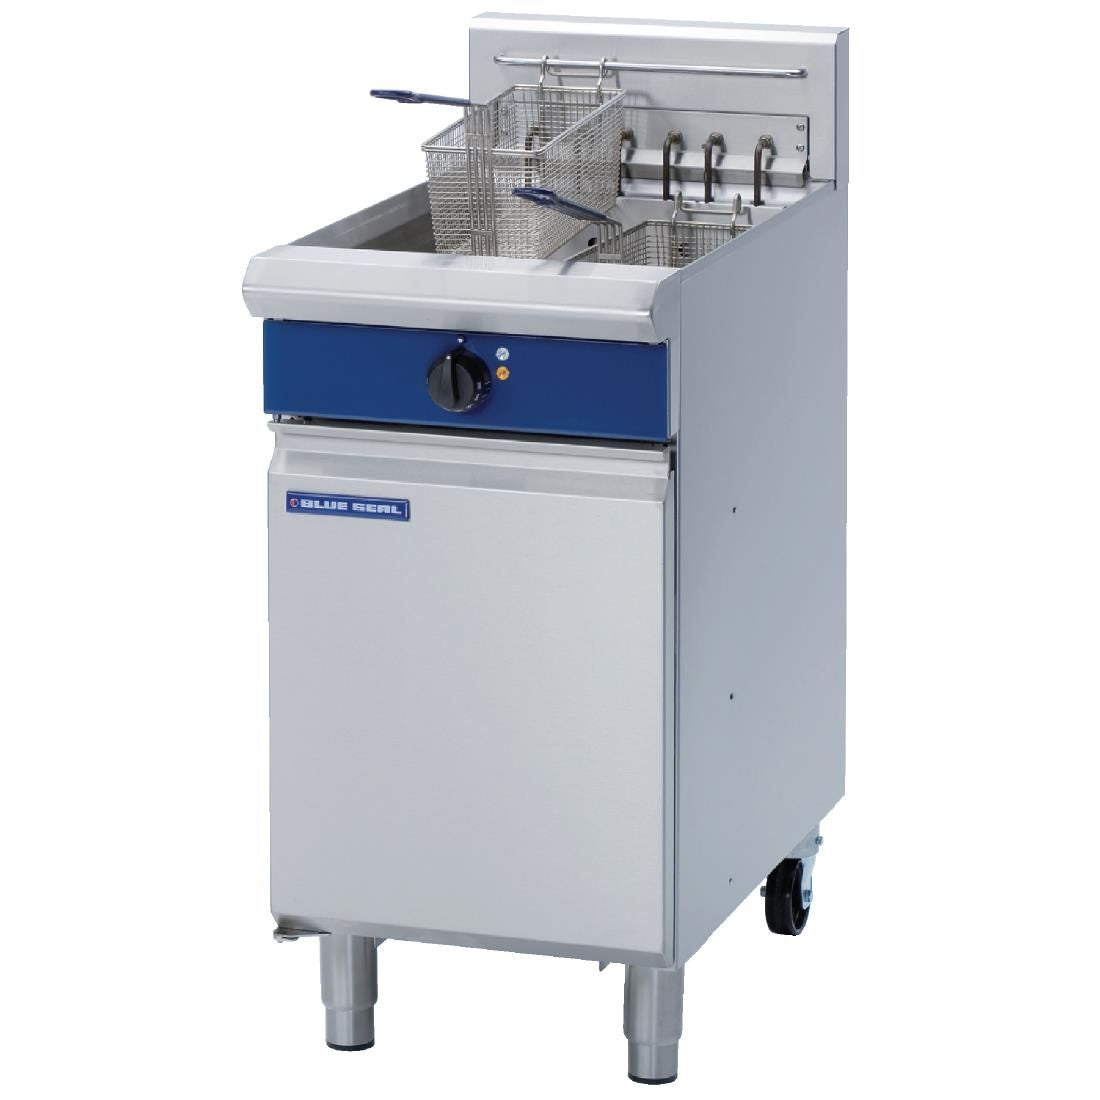 G285 Blue Seal Single Tank Twin Basket Free Standing Electric Fryer E43 JD Catering Equipment Solutions Ltd